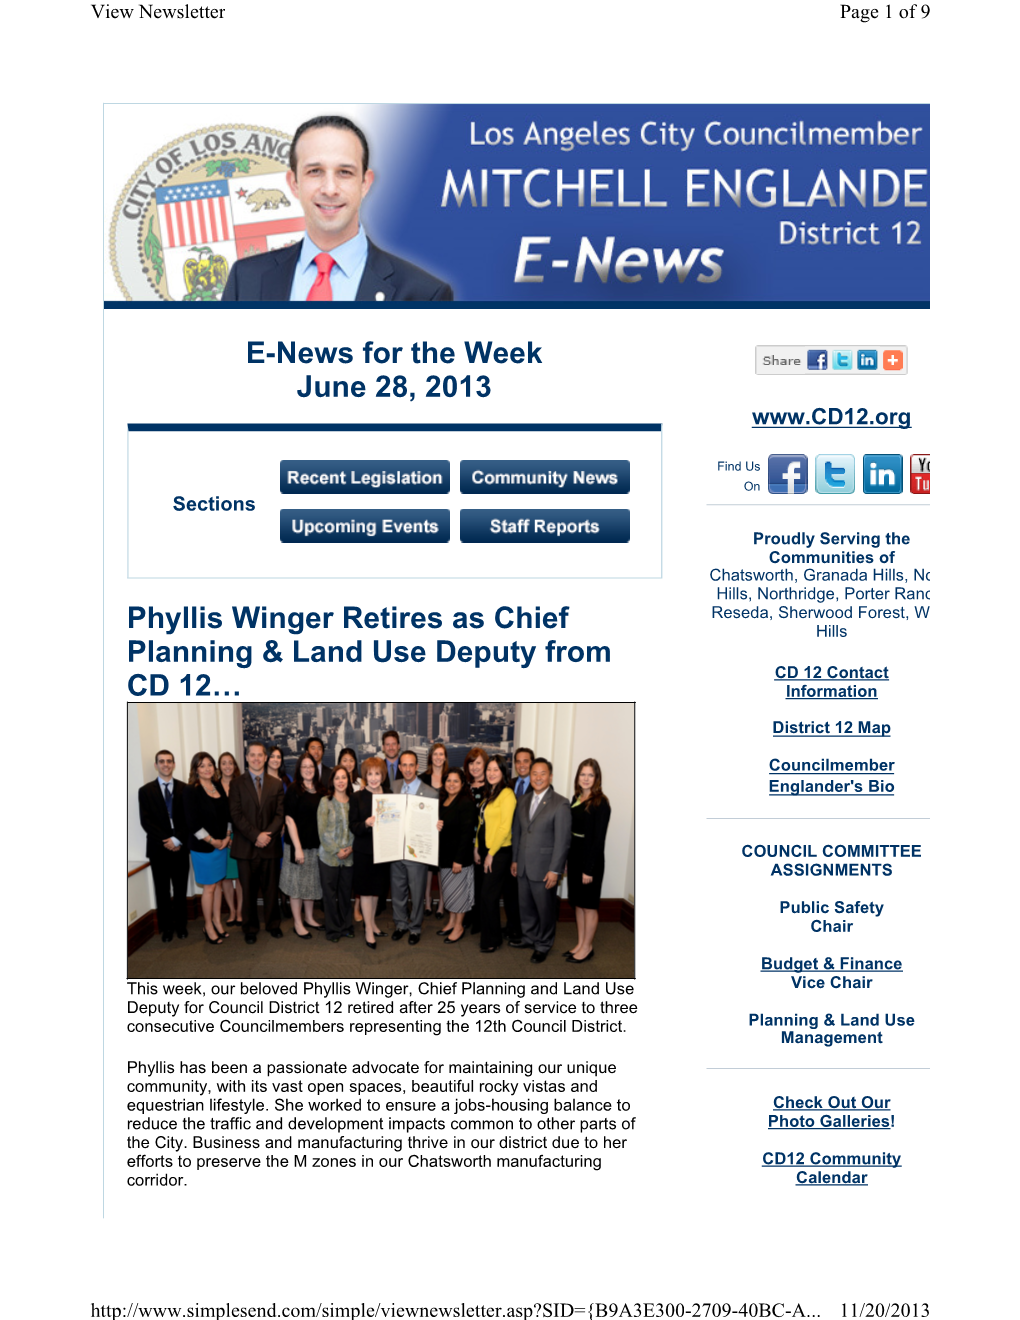 E-News for the Week June 28, 2013 Phyllis Winger Retires As Chief Planning & Land Use Deputy from CD